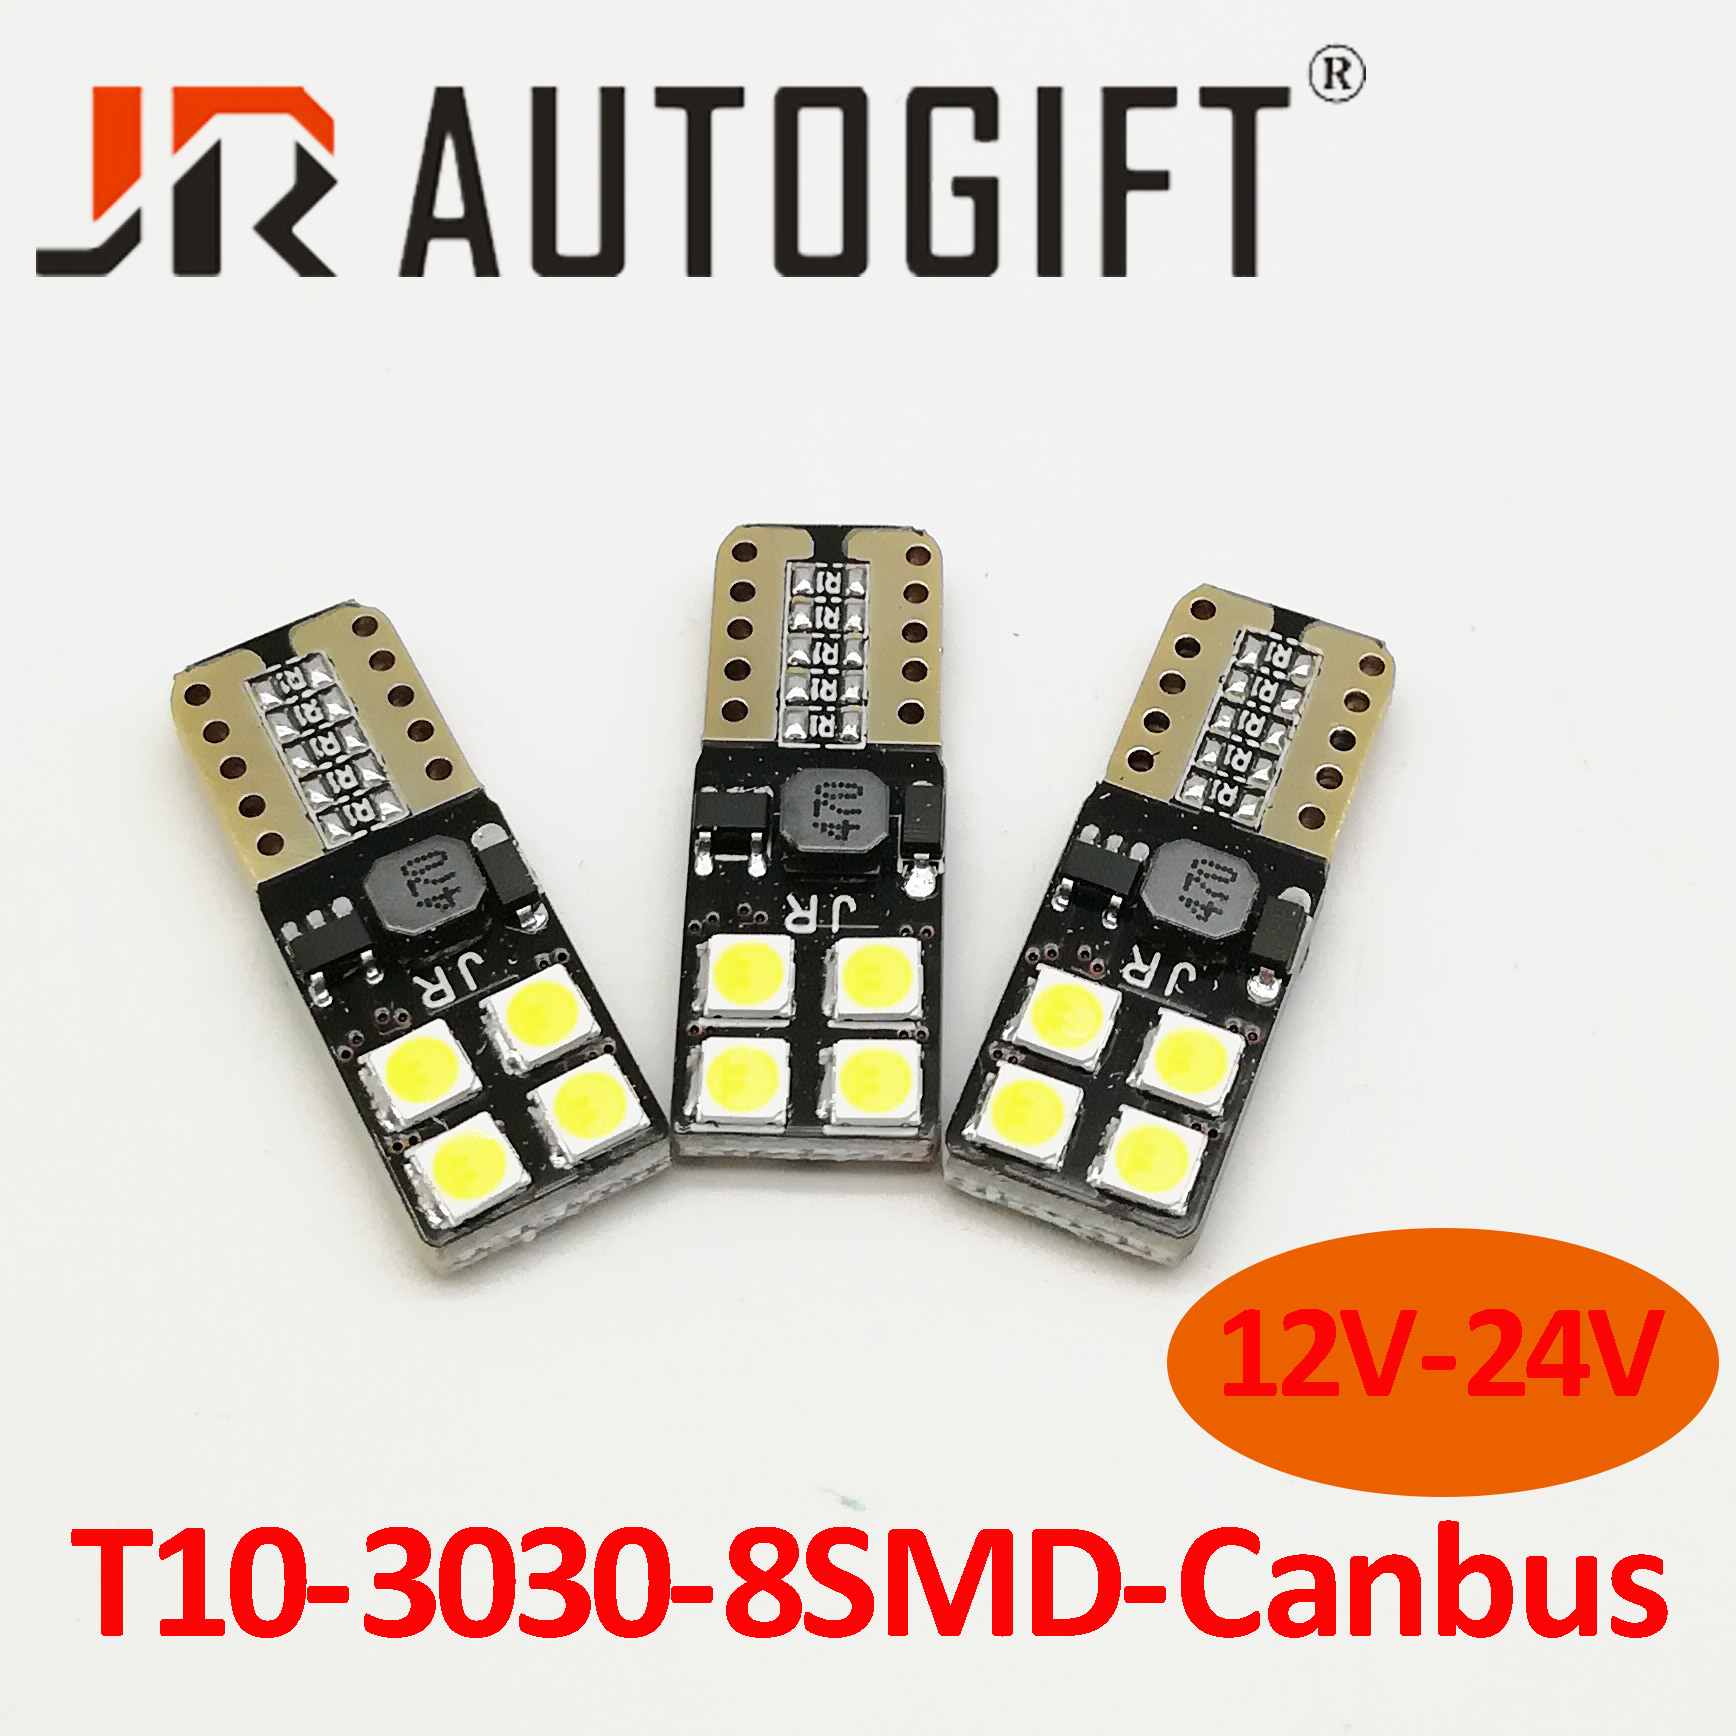 2 STUKS T10 8SMD 3030 LED Auto Licht Canbus GEEN OBC FOUT Auto Wedge Lamp W5W 8 SMD led Parking Lamp 12V